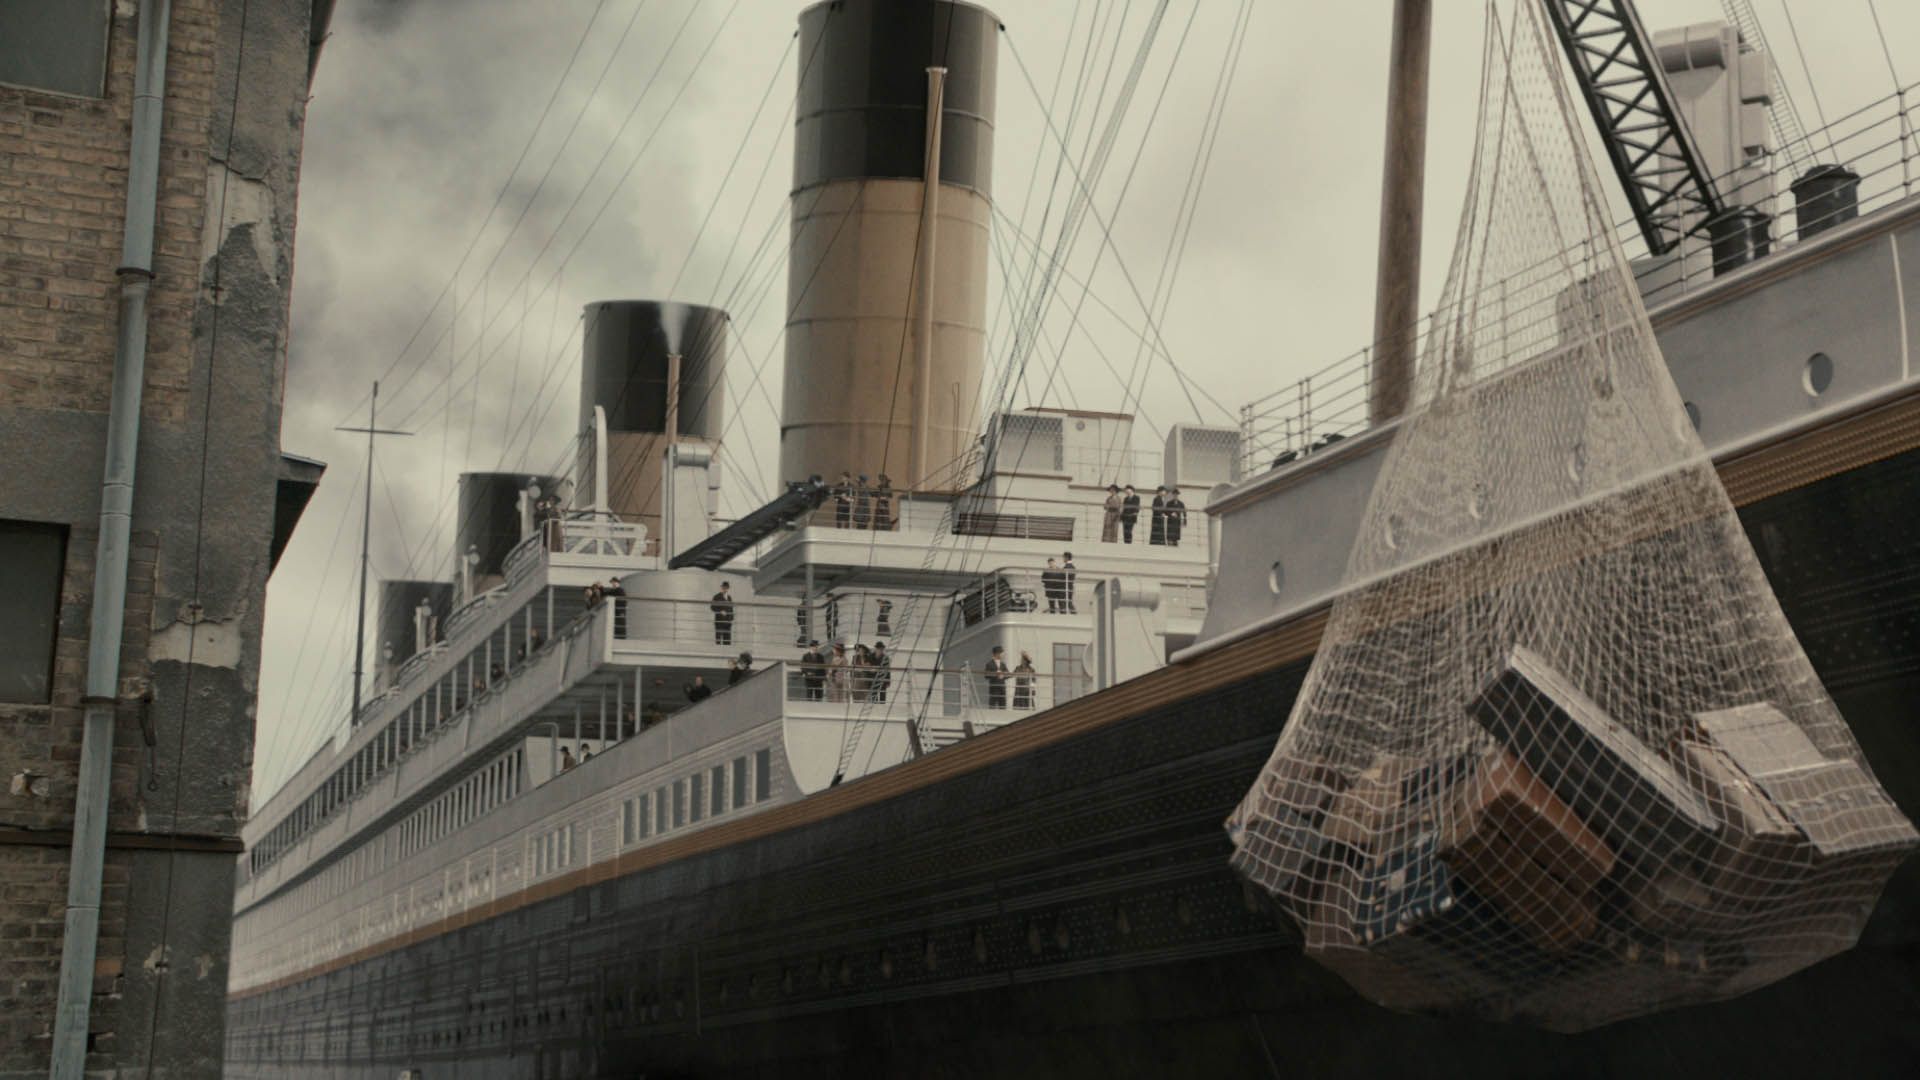 The Titanic II has been pushed back to 2018, but is it actually happening?